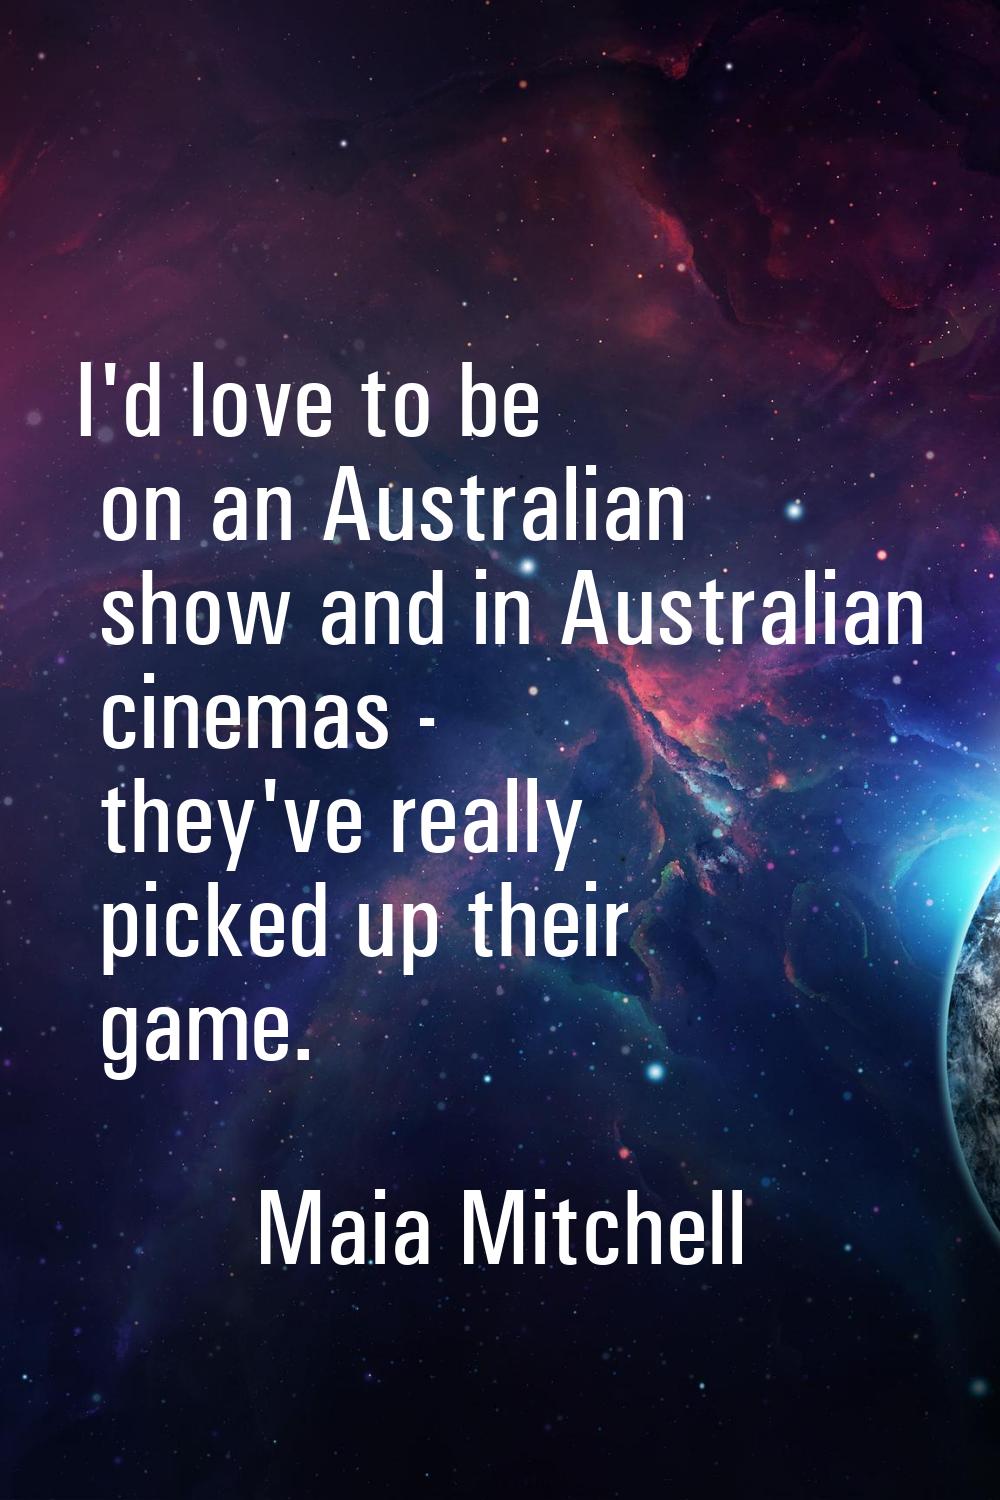 I'd love to be on an Australian show and in Australian cinemas - they've really picked up their gam